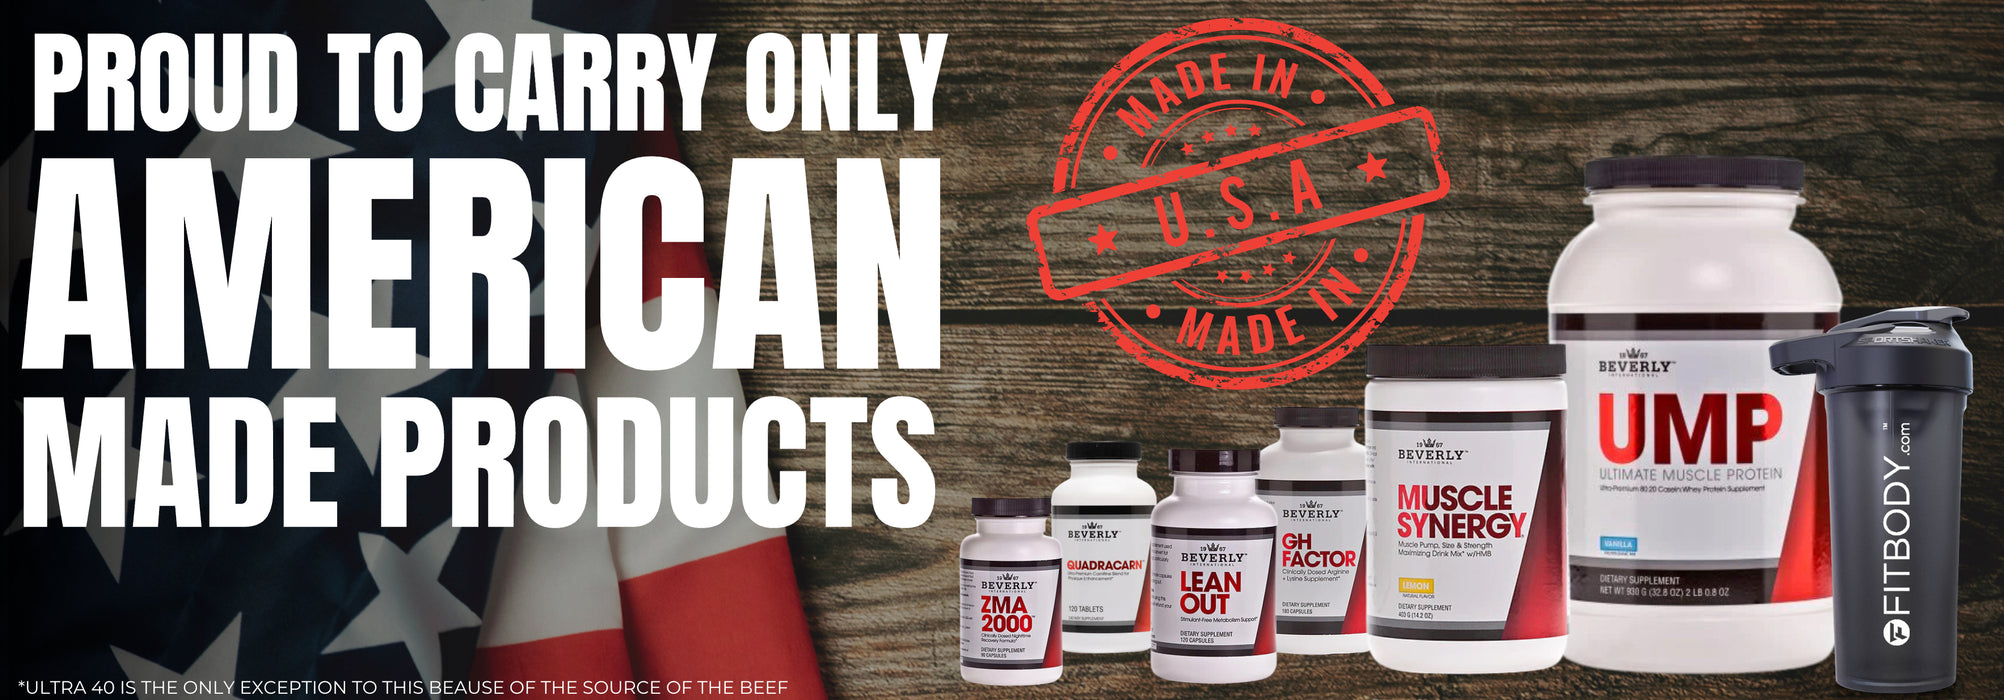 Proud to Carry Only American Made Products